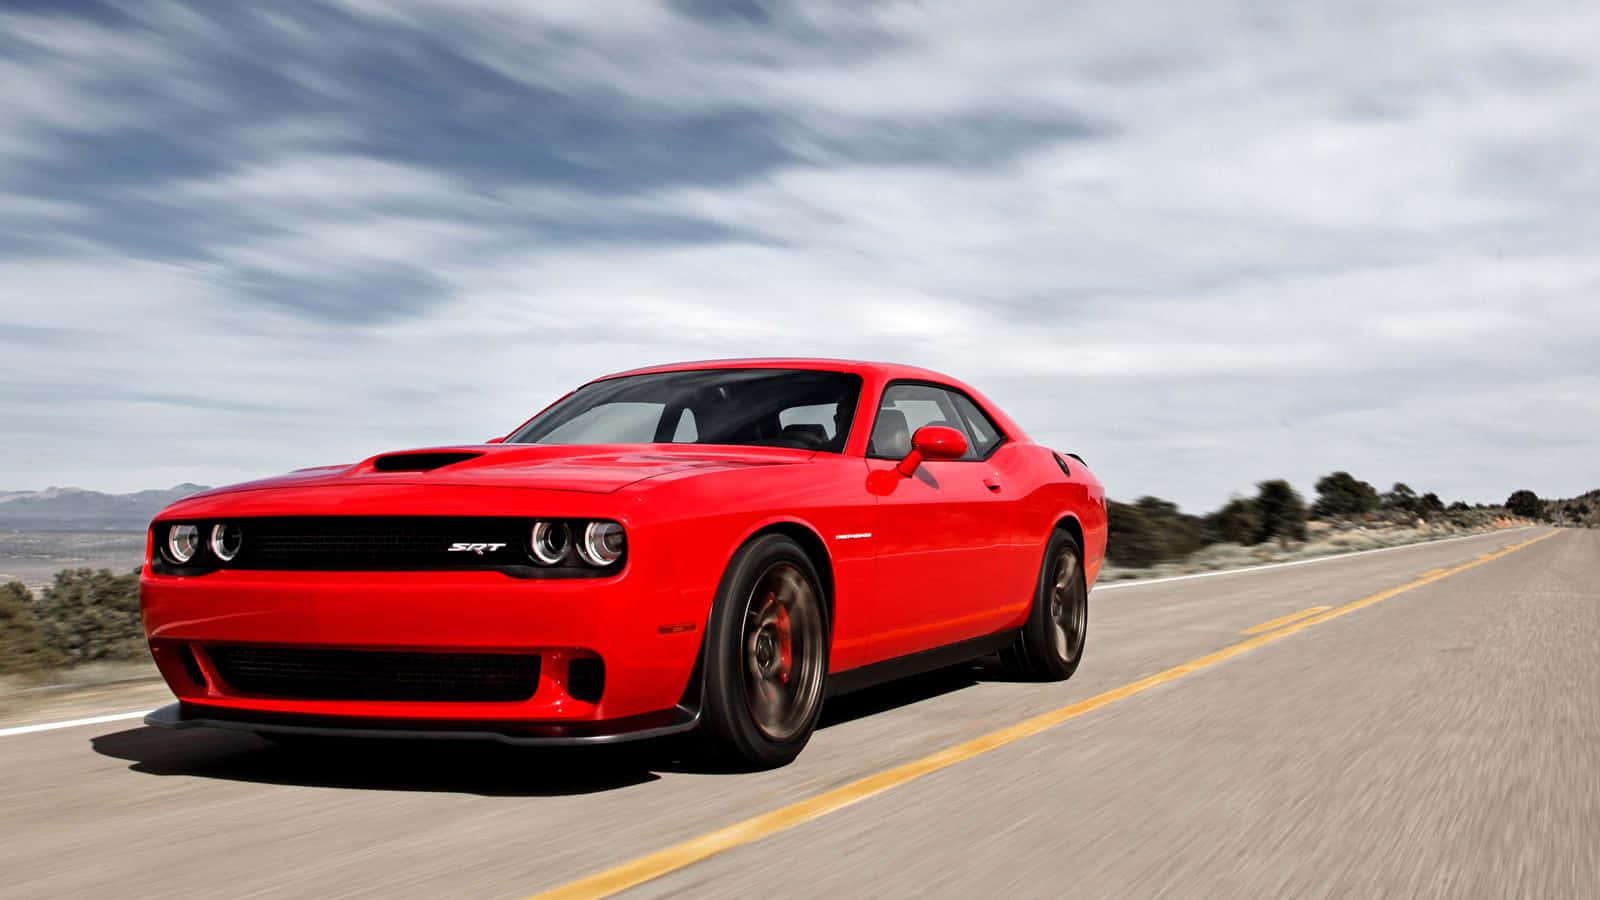 Power and Speed - Red Dodge Hellcat in the Spotlight Wallpaper